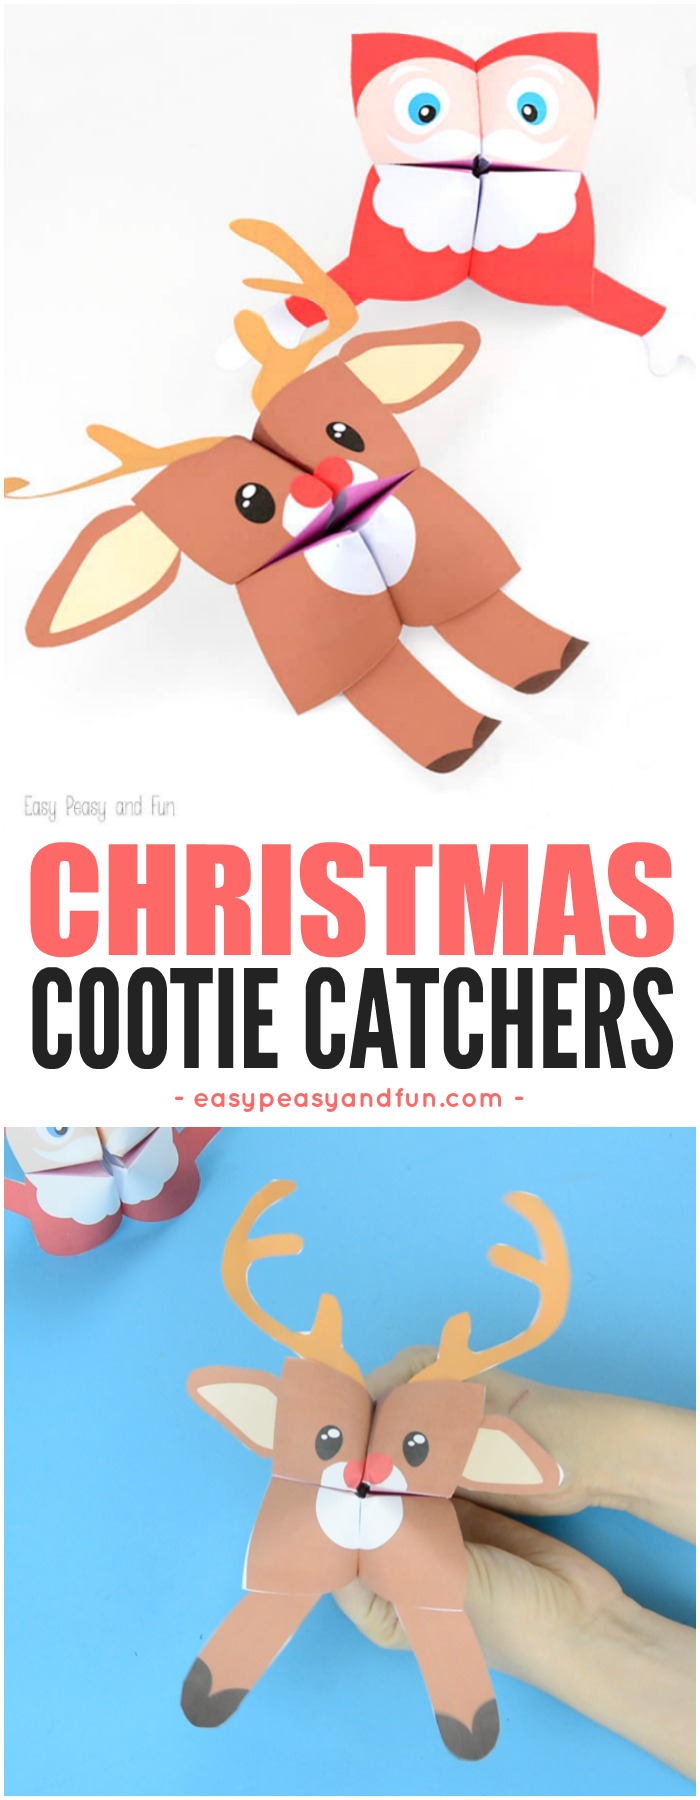 Christmas Cootie Catchers - Fortune Teller Characters - Easy Peasy and Fun